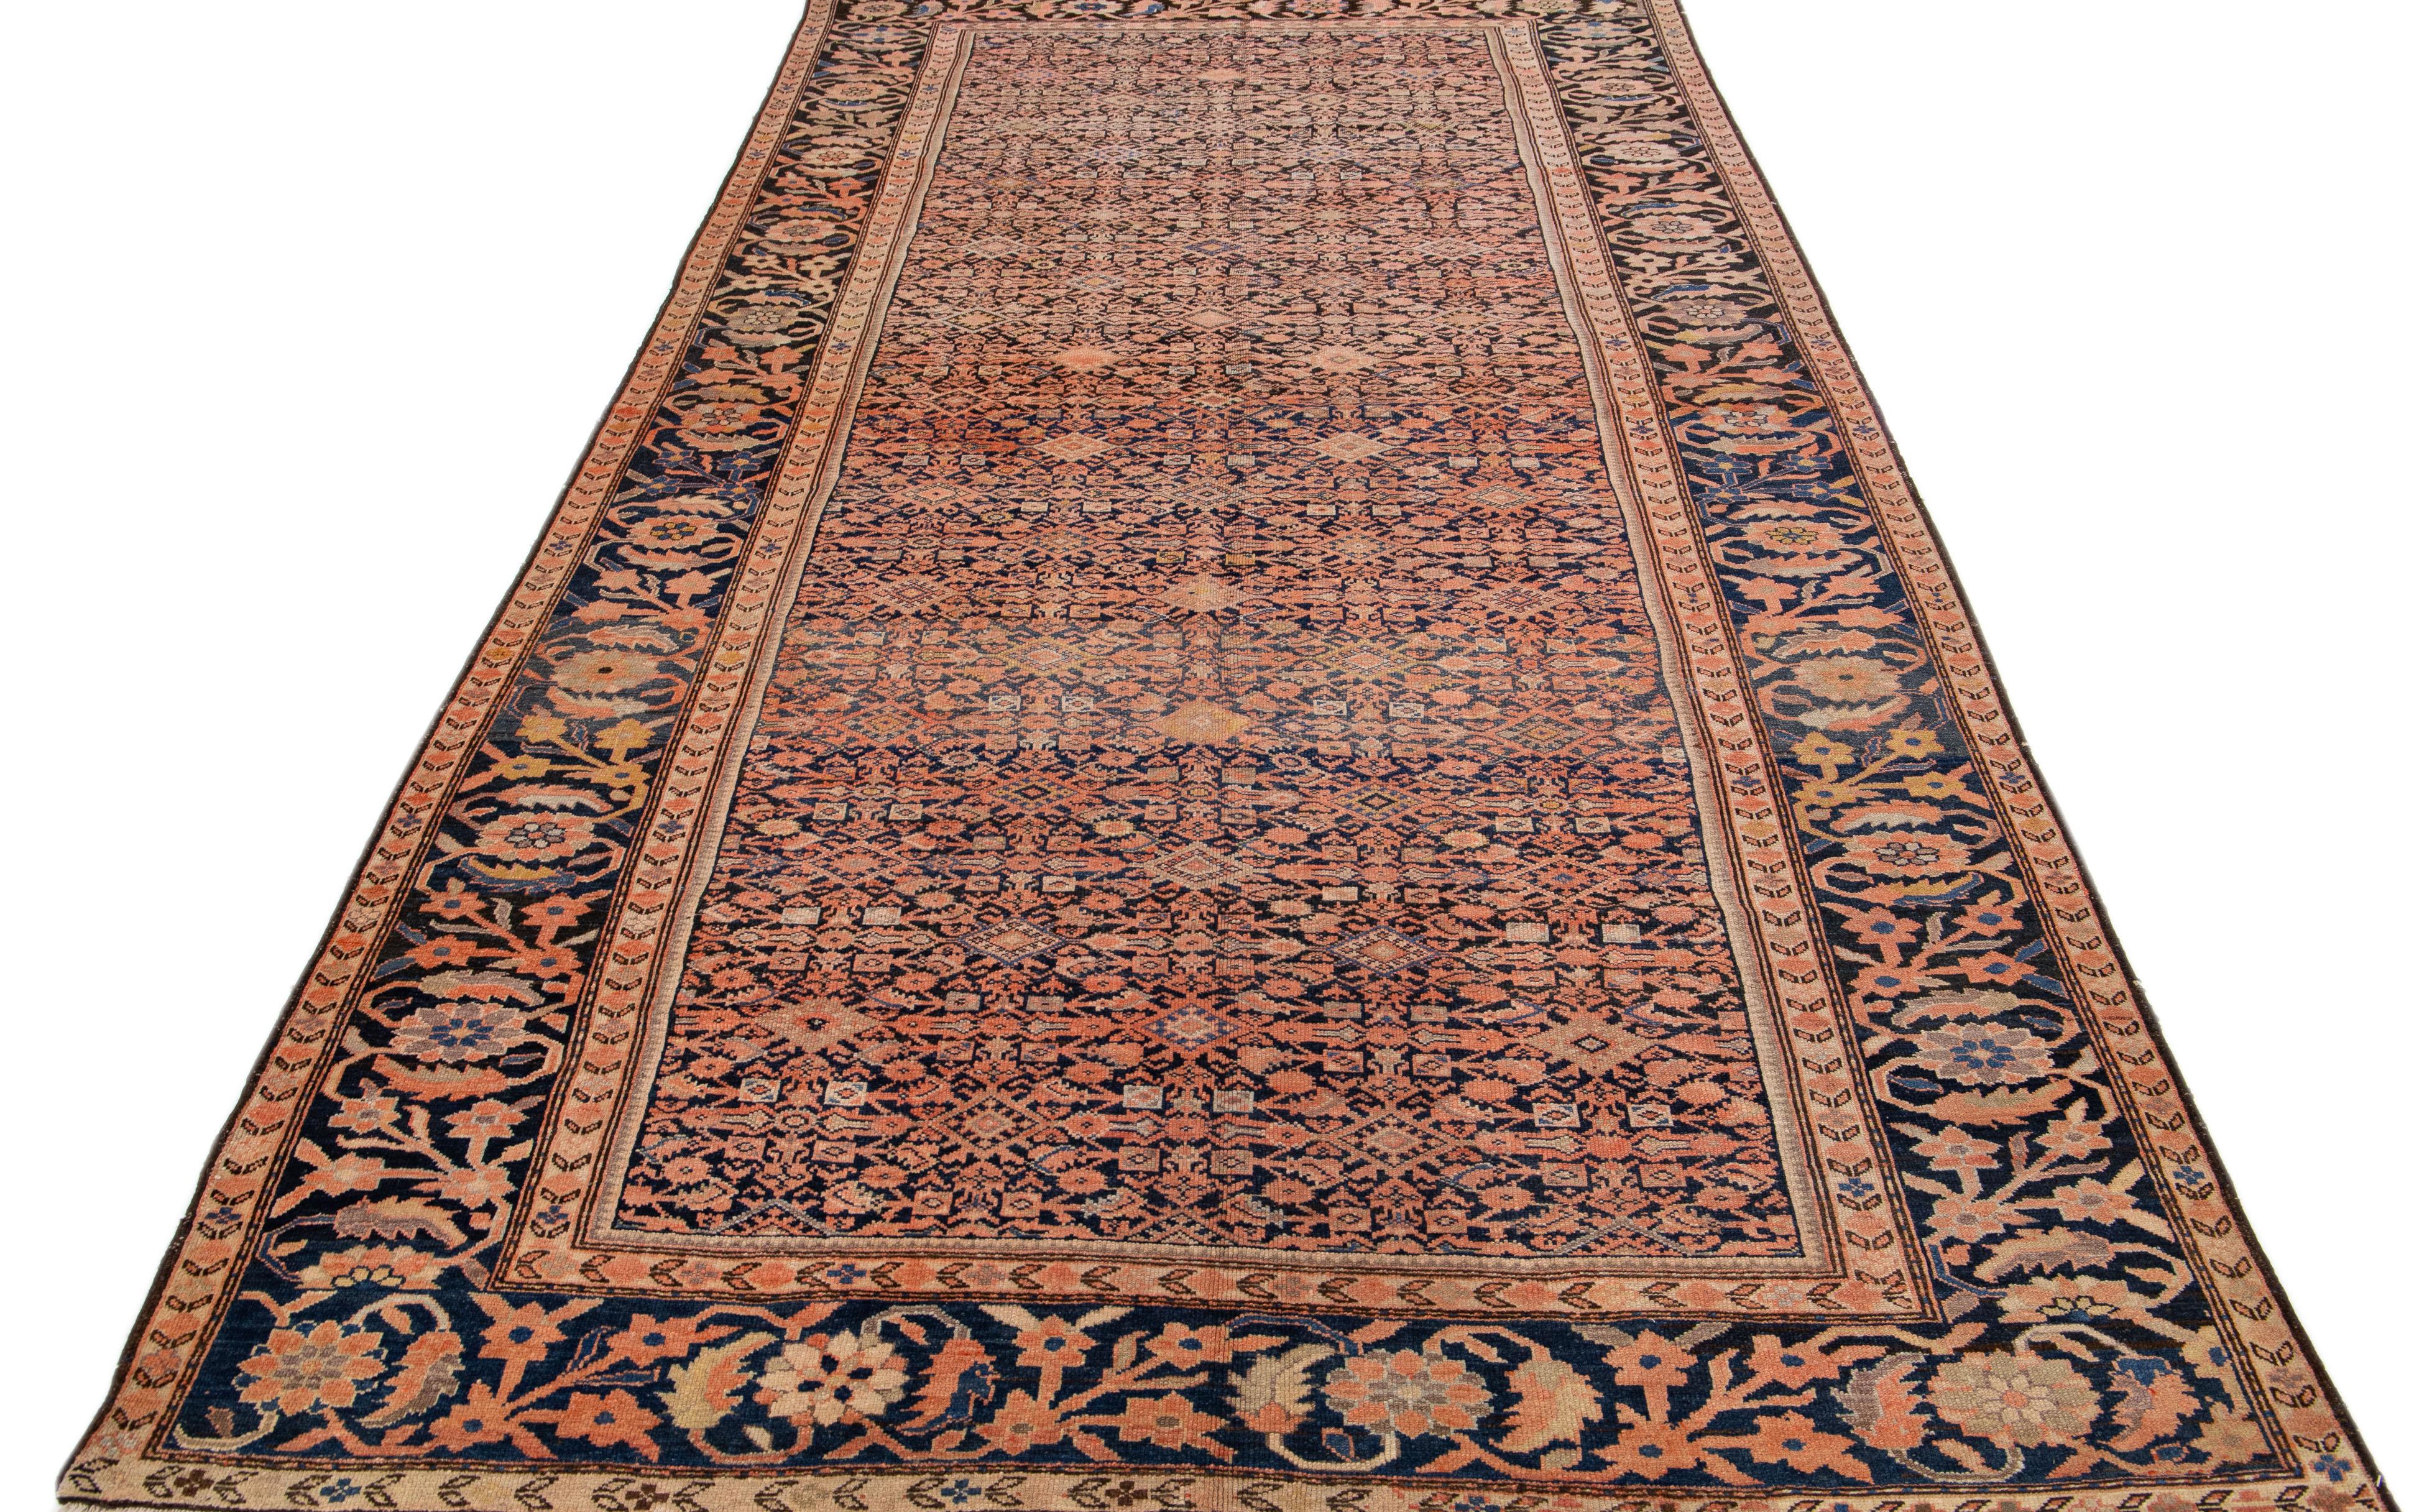 A beautiful Antique Malayer hand-knotted wool rug with a dark blue field. This Persian rug has peach and beige accents in an all-over floral design.

This rug measures 6'9